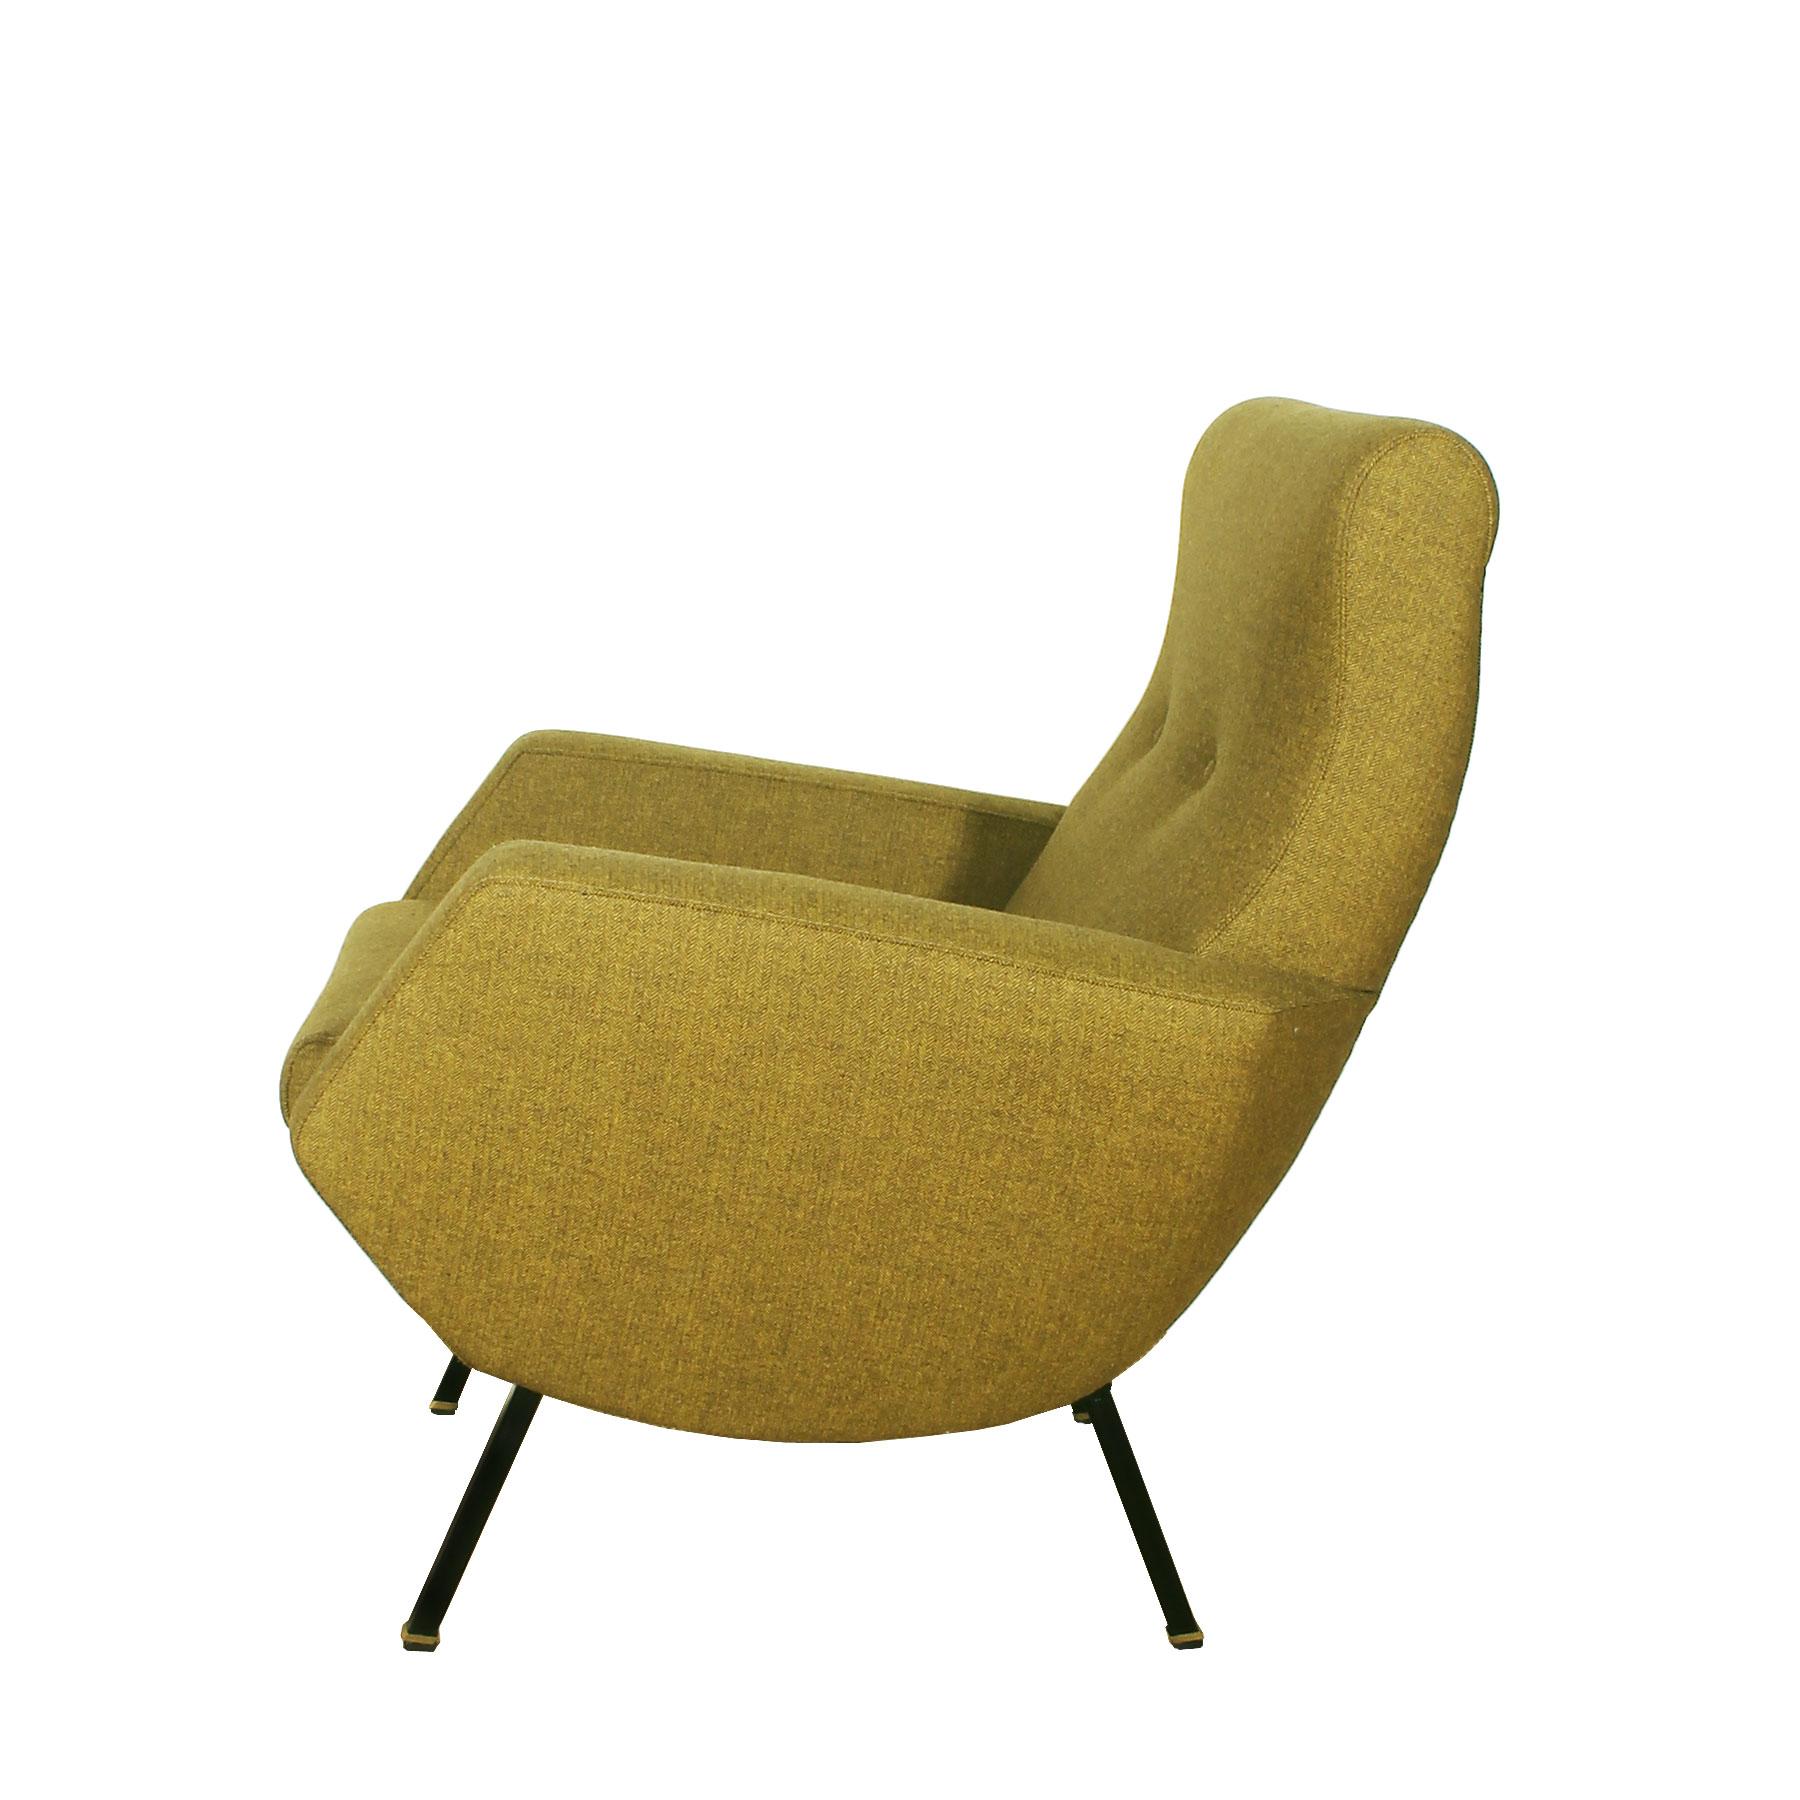 Mid-20th Century Pair of Mid-Century Modern Armchairs in New Mottled Yellow Fabric - Italy, 1960s For Sale